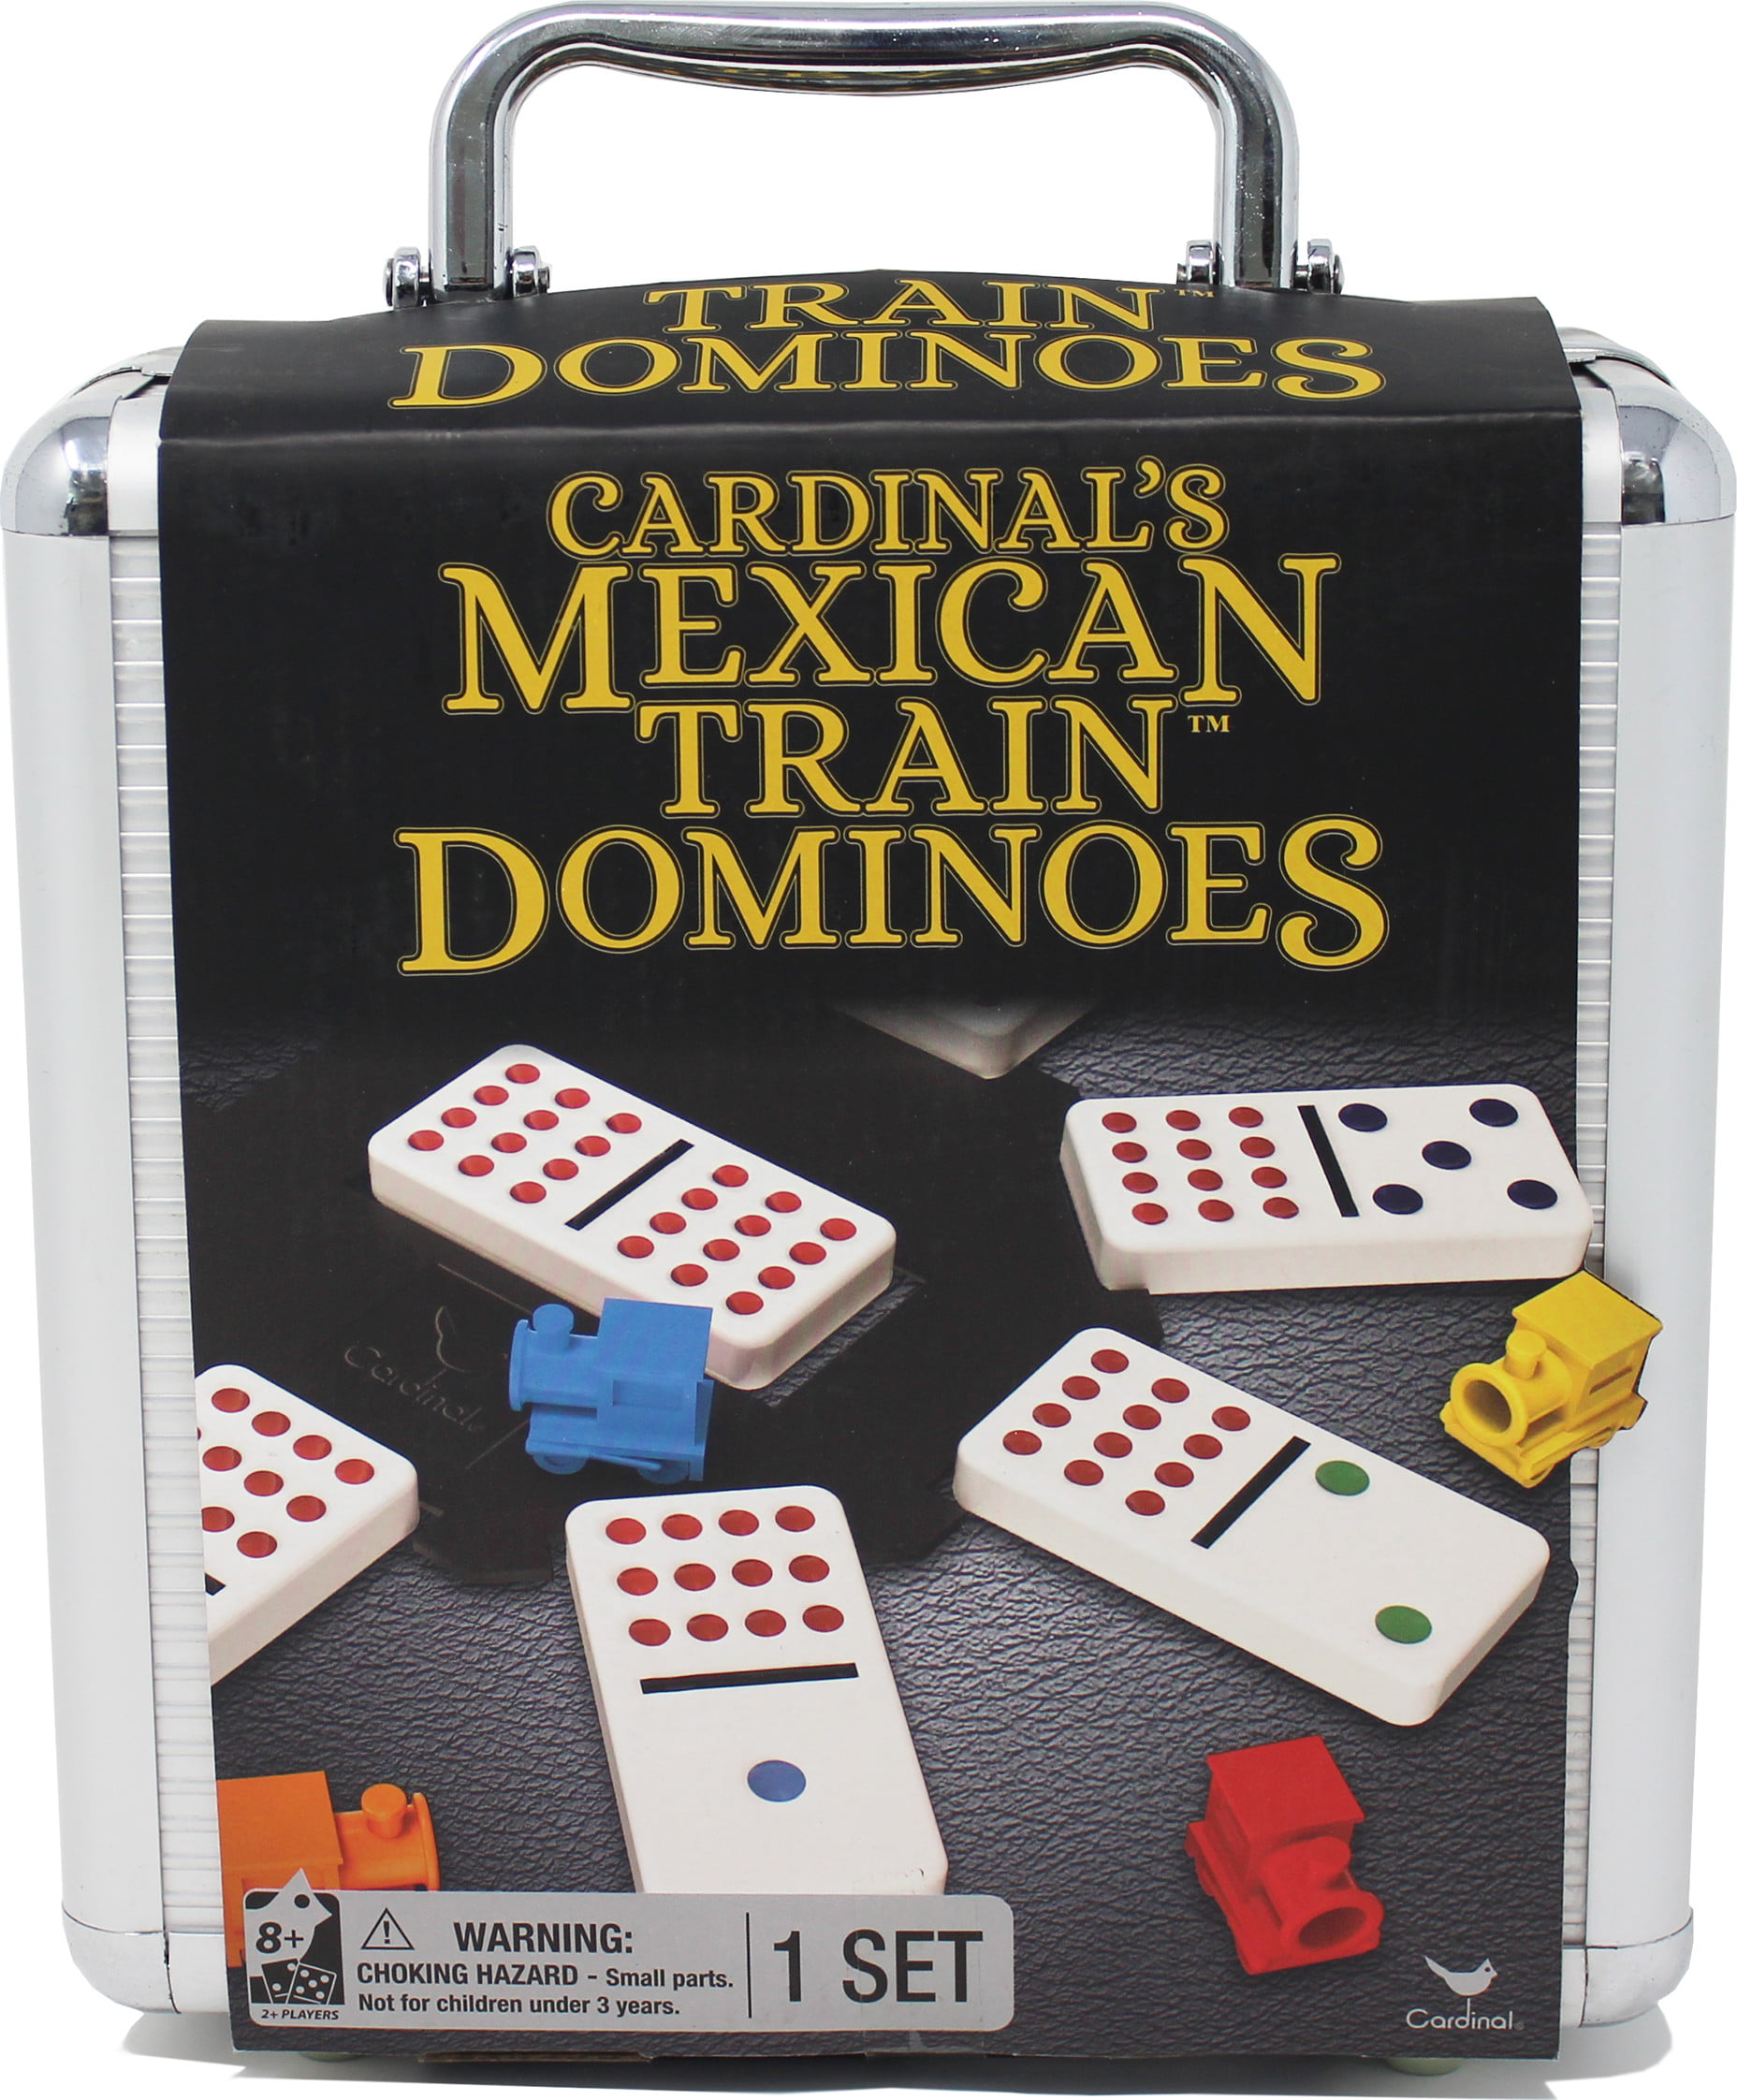 Dominoes Double 15 Color Number Professional Size Mexican Train & Chicken Domino 